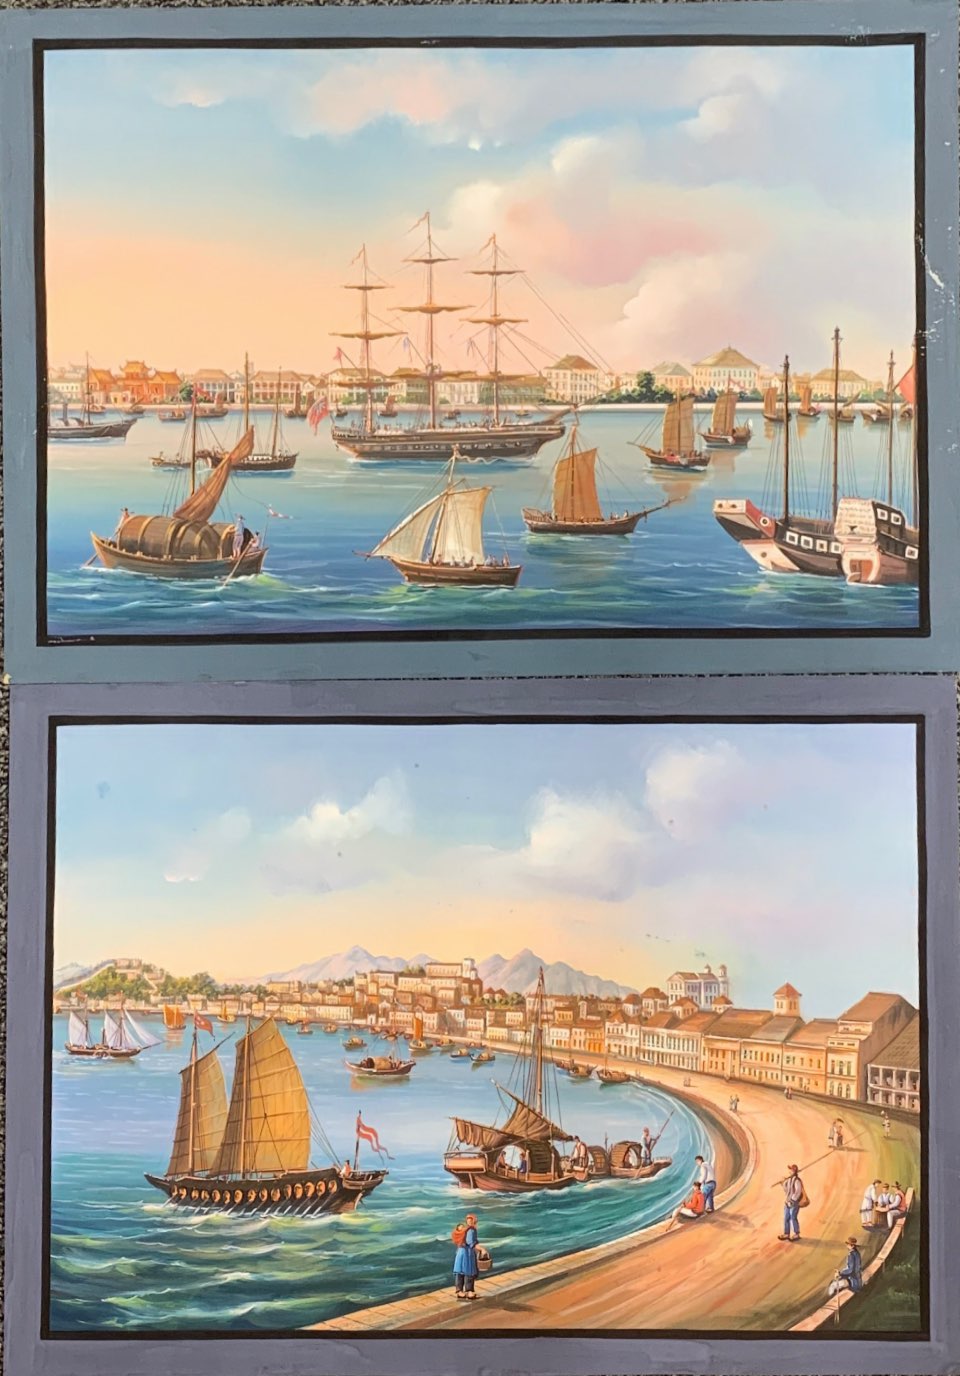 Two unframed gouache on artist's paper of early Chinese trading concessions in Hong Kong or